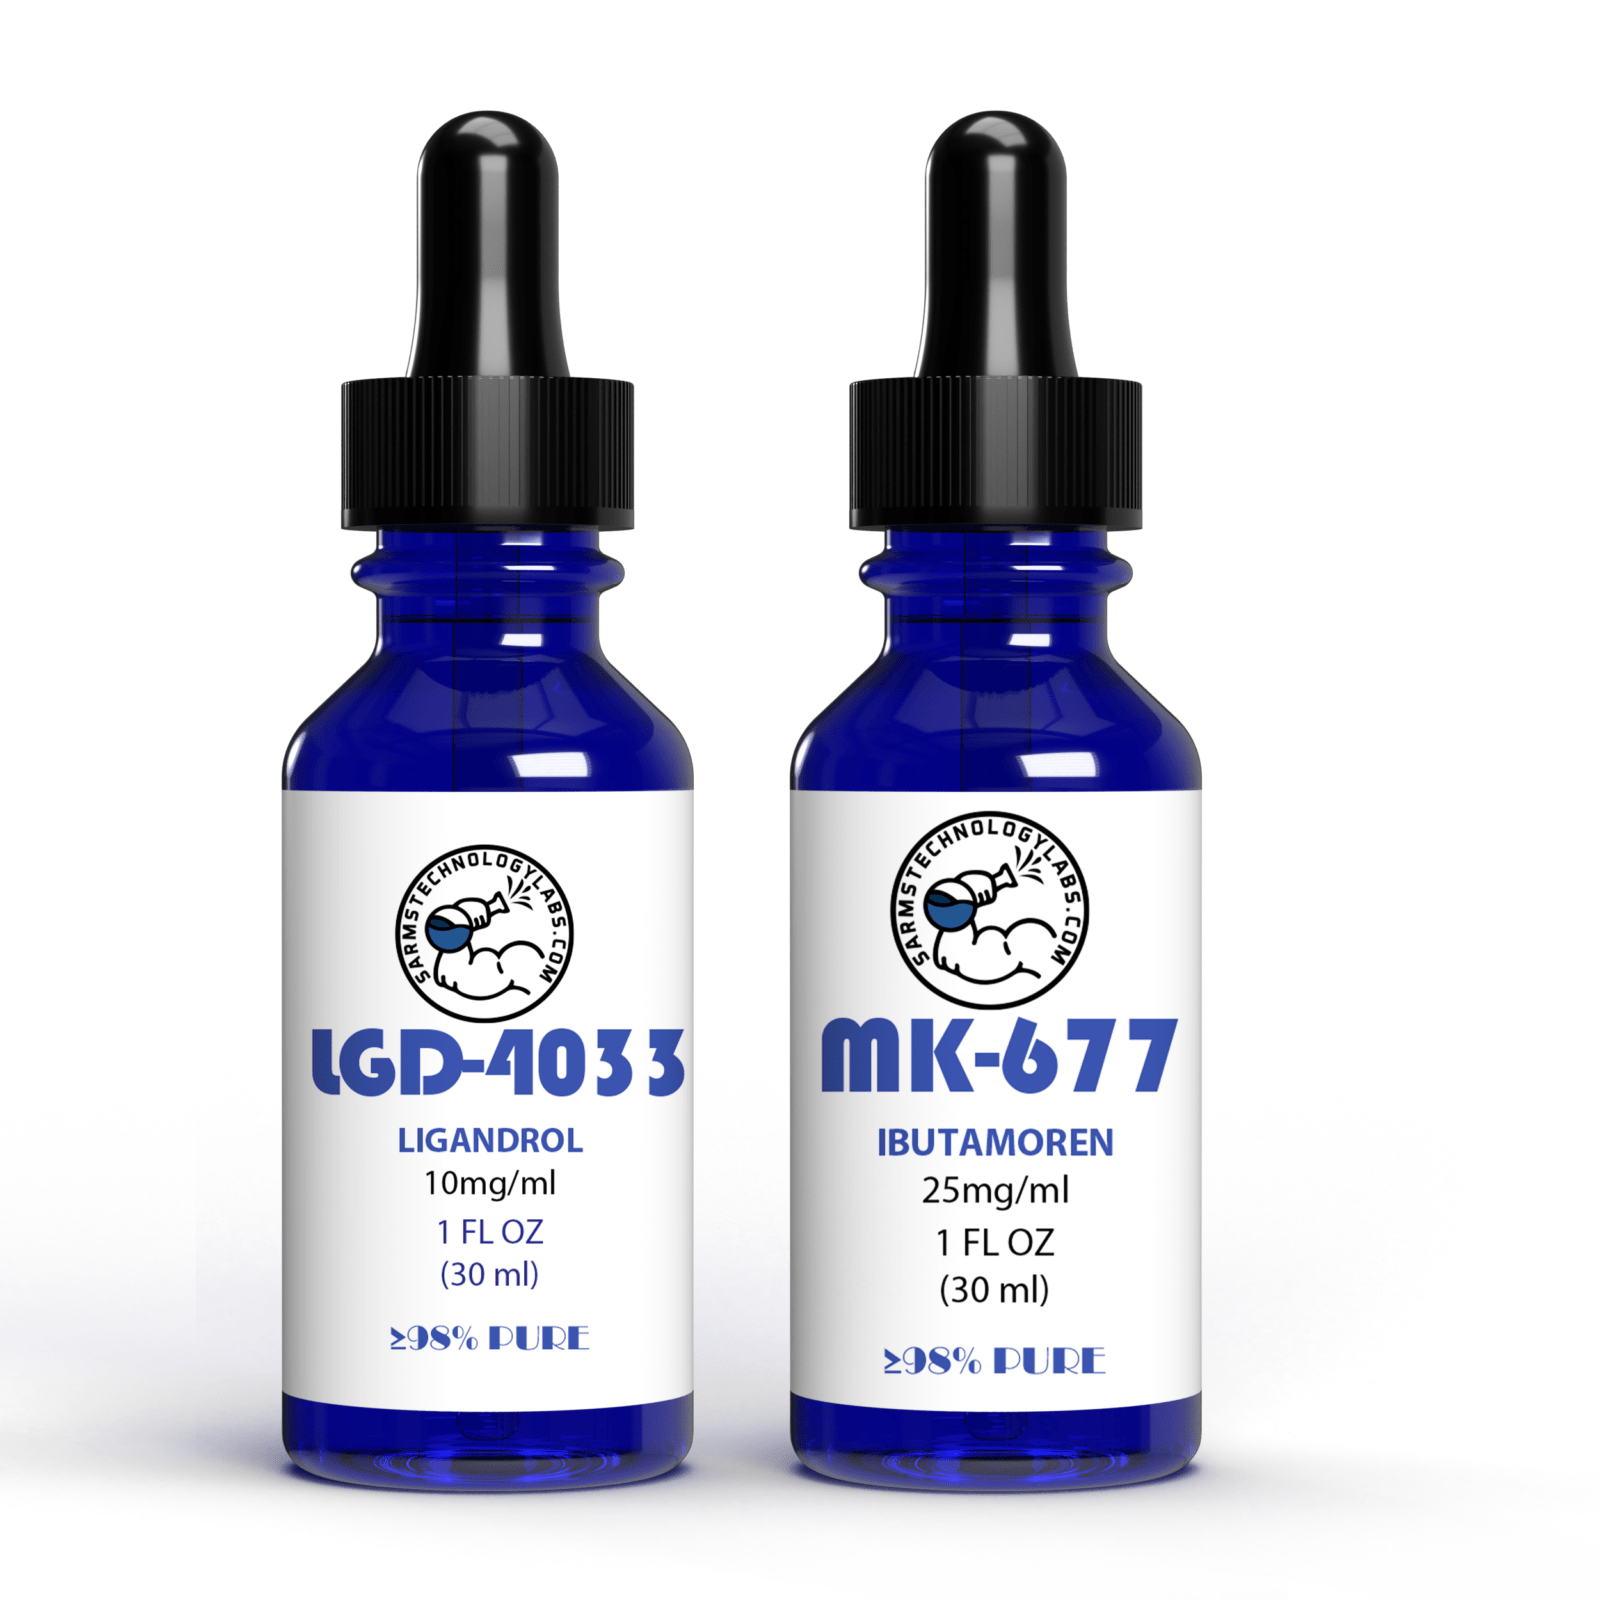 Buy High-Quality Liquid LGD-4033 and MK-677 Stack